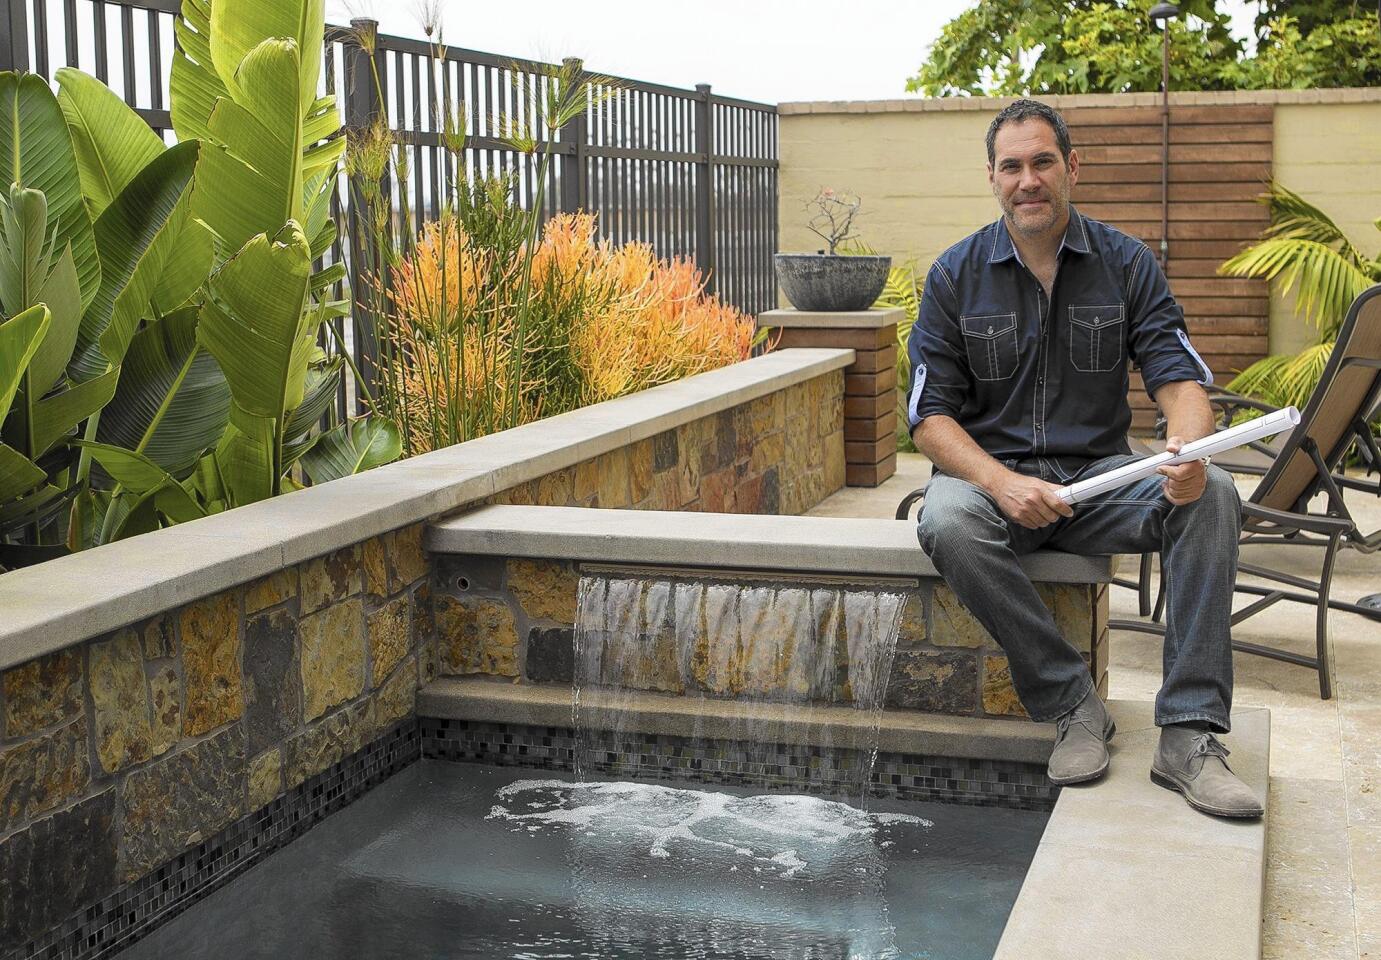 Mitch Kalamian, owner of Solena Landscape, shows off one of his latest project in Huntington Beach.